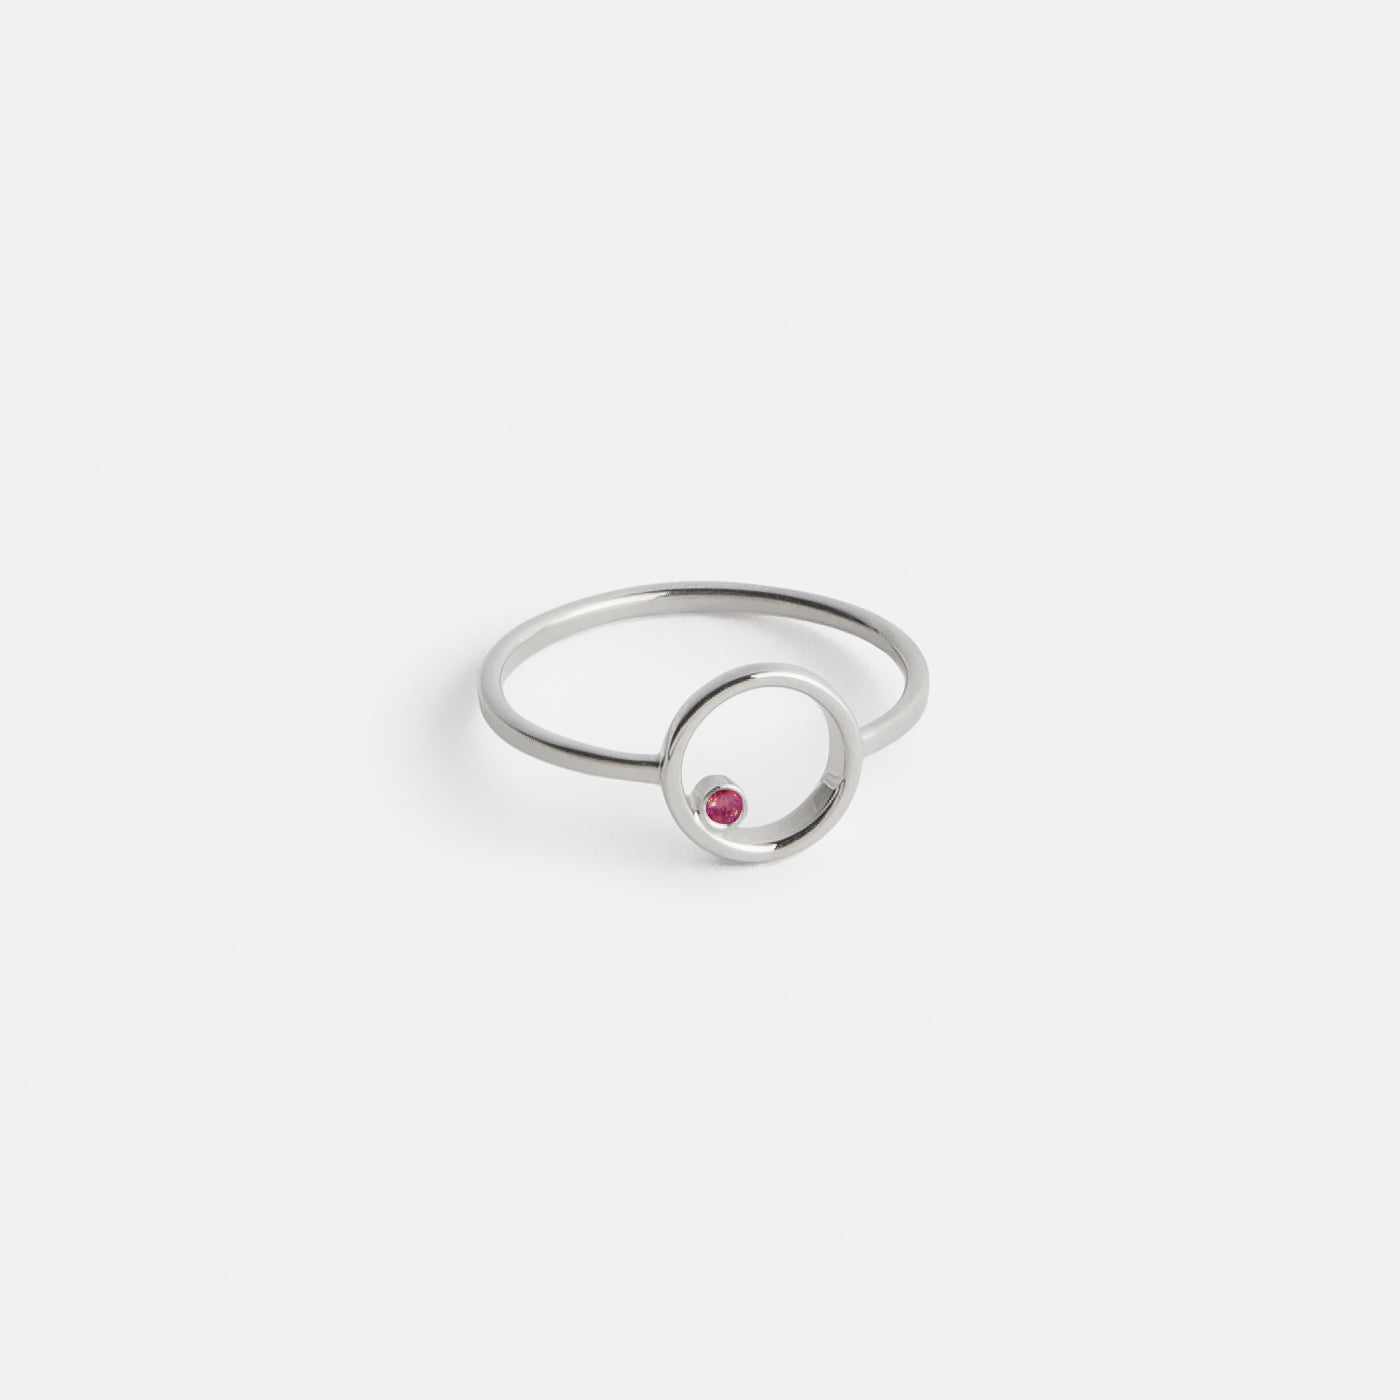 Ila Unique Ring in 14k White Gold set with Ruby by SHW Fine Jewelry NYC